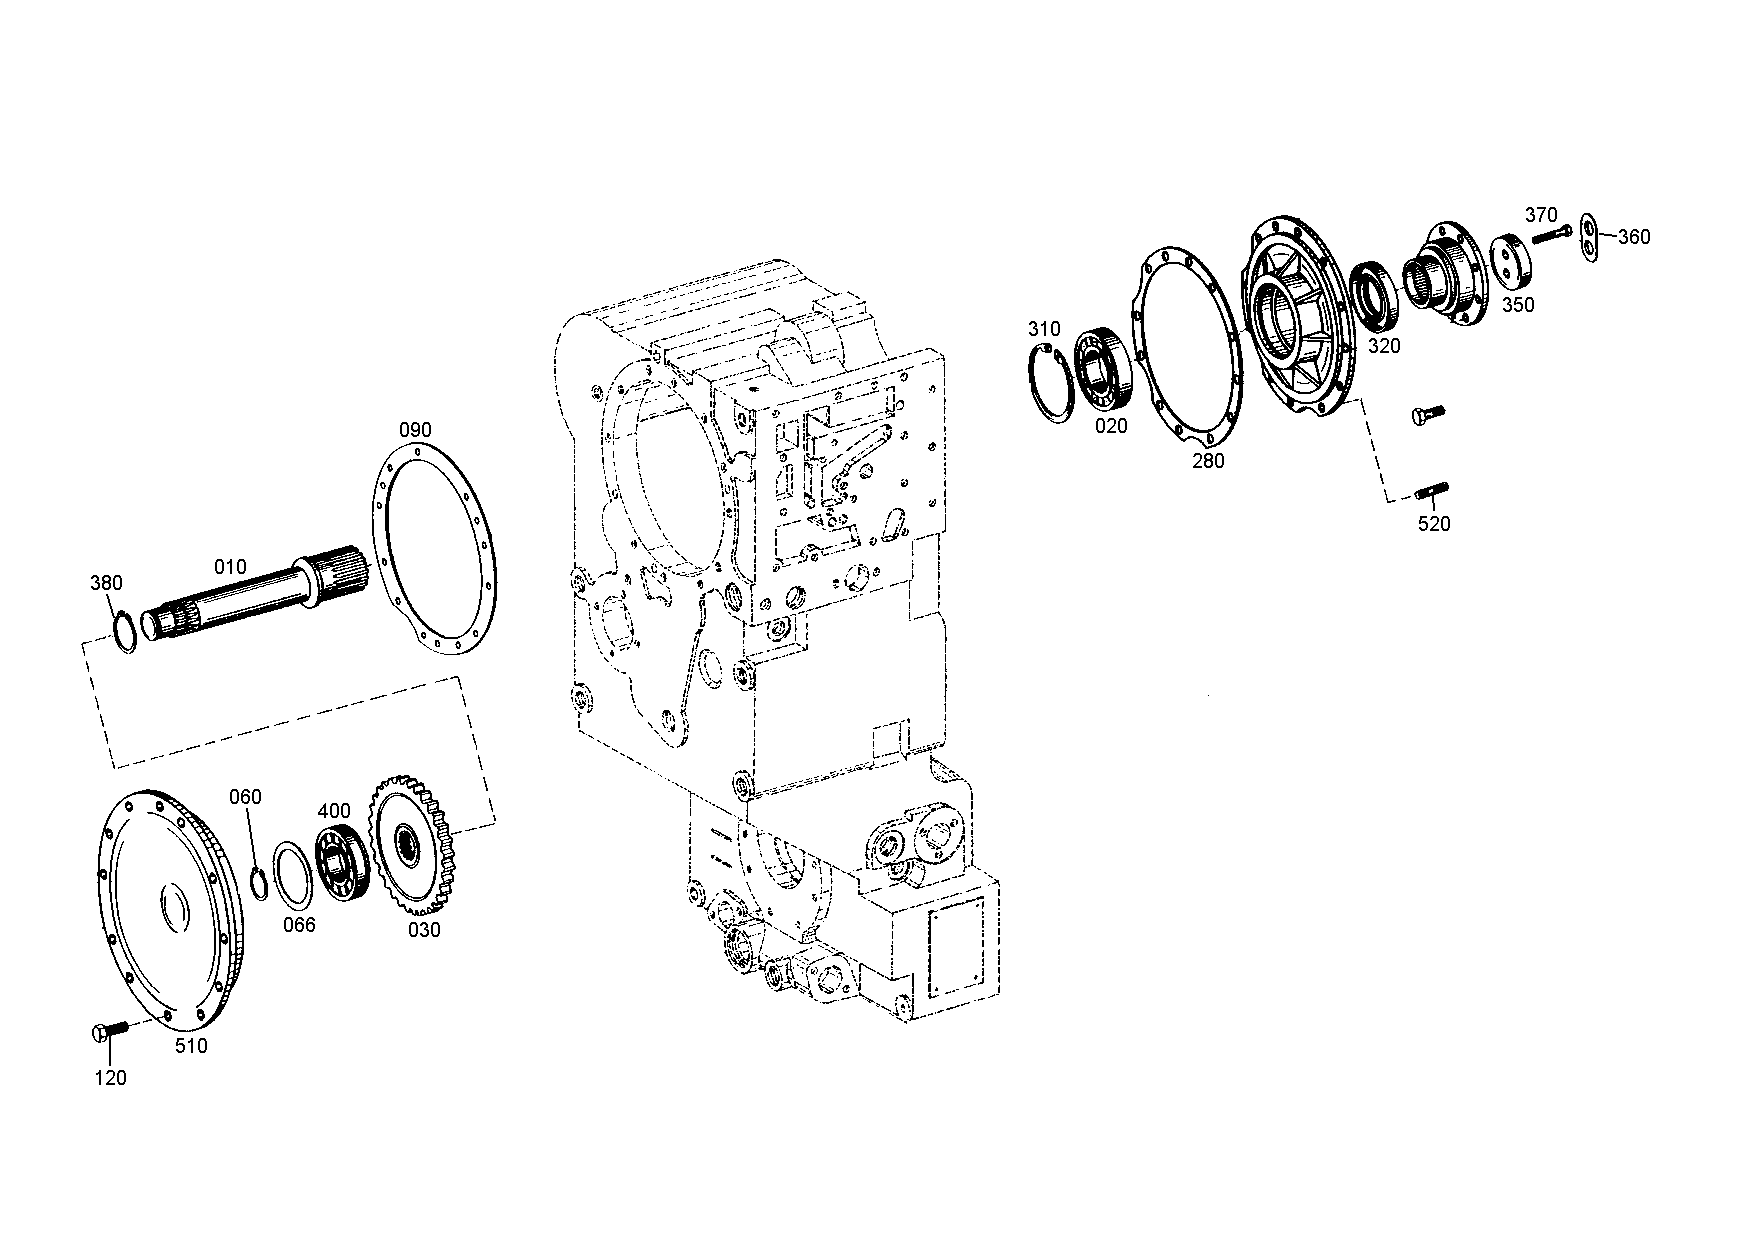 drawing for MOXY TRUCKS AS 052526 - WASHER (figure 1)